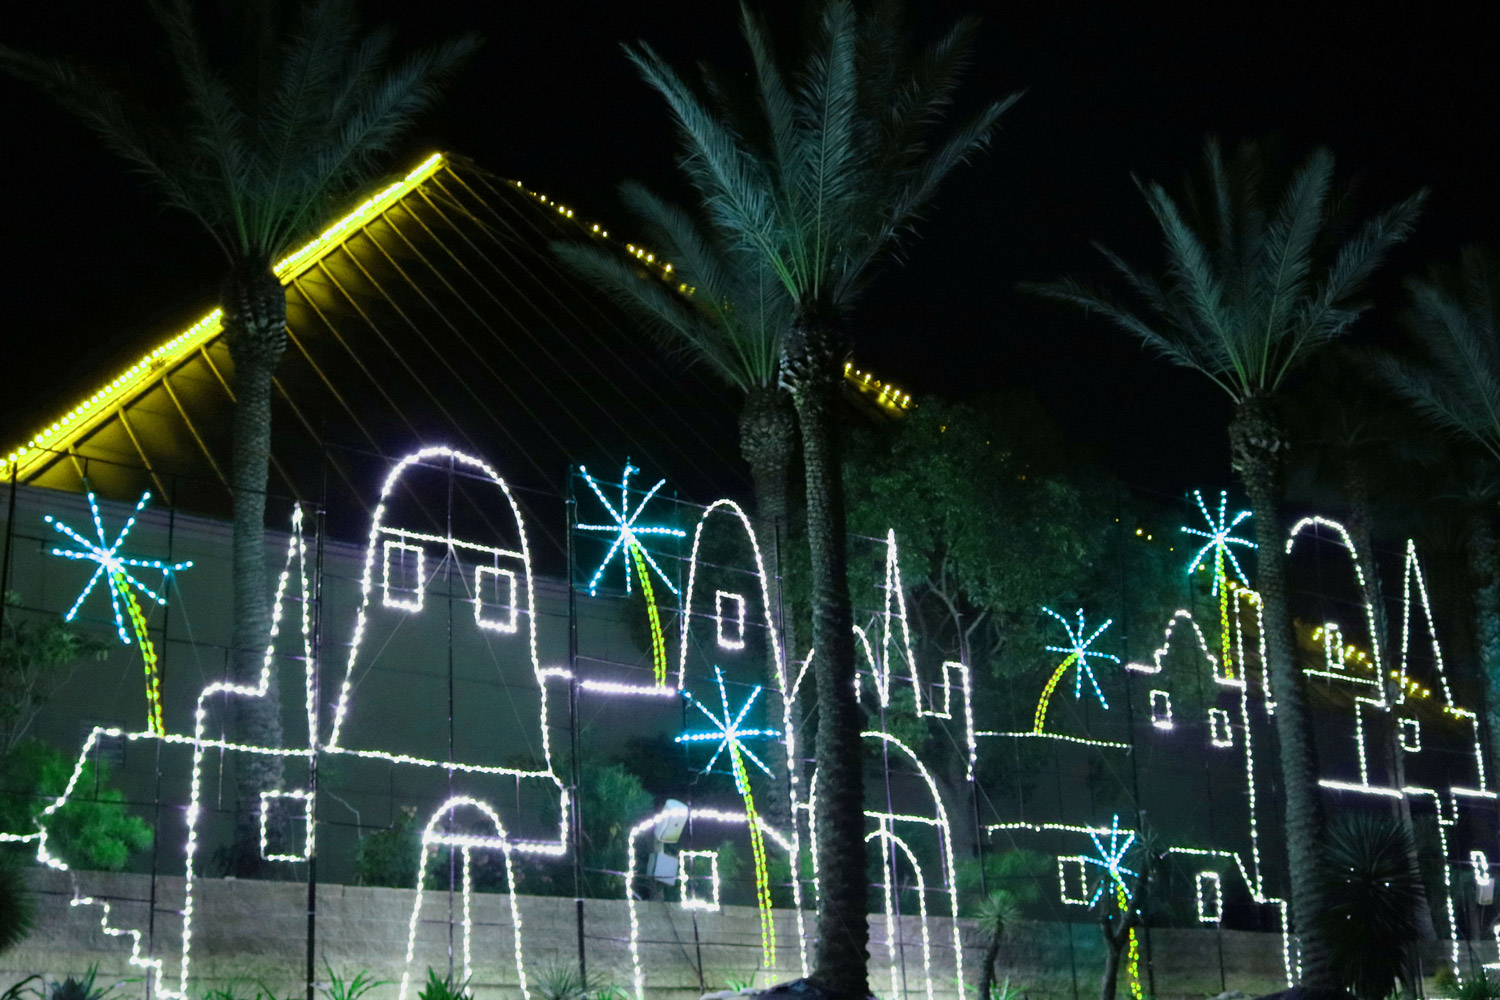 Gallery Moody Gardens Festival Of Lights Returns For The Holidays